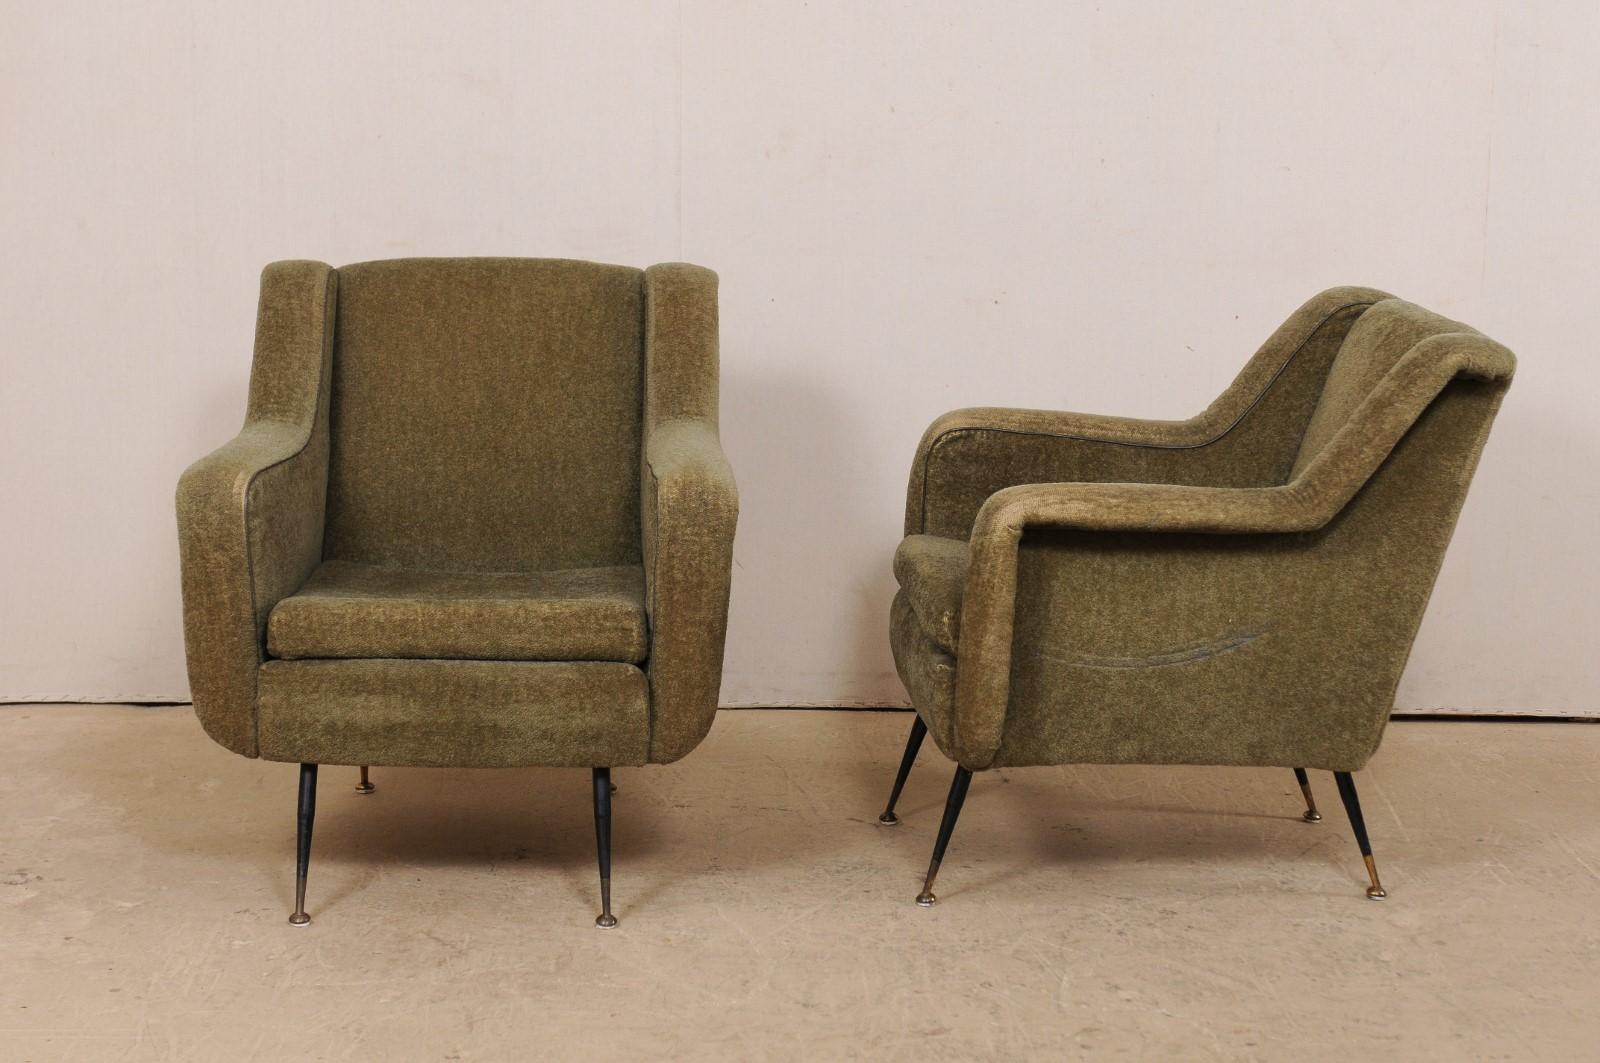 Pair of Mid-Century Modern Upholstered Club Chairs from Italy with Iron Legs 3